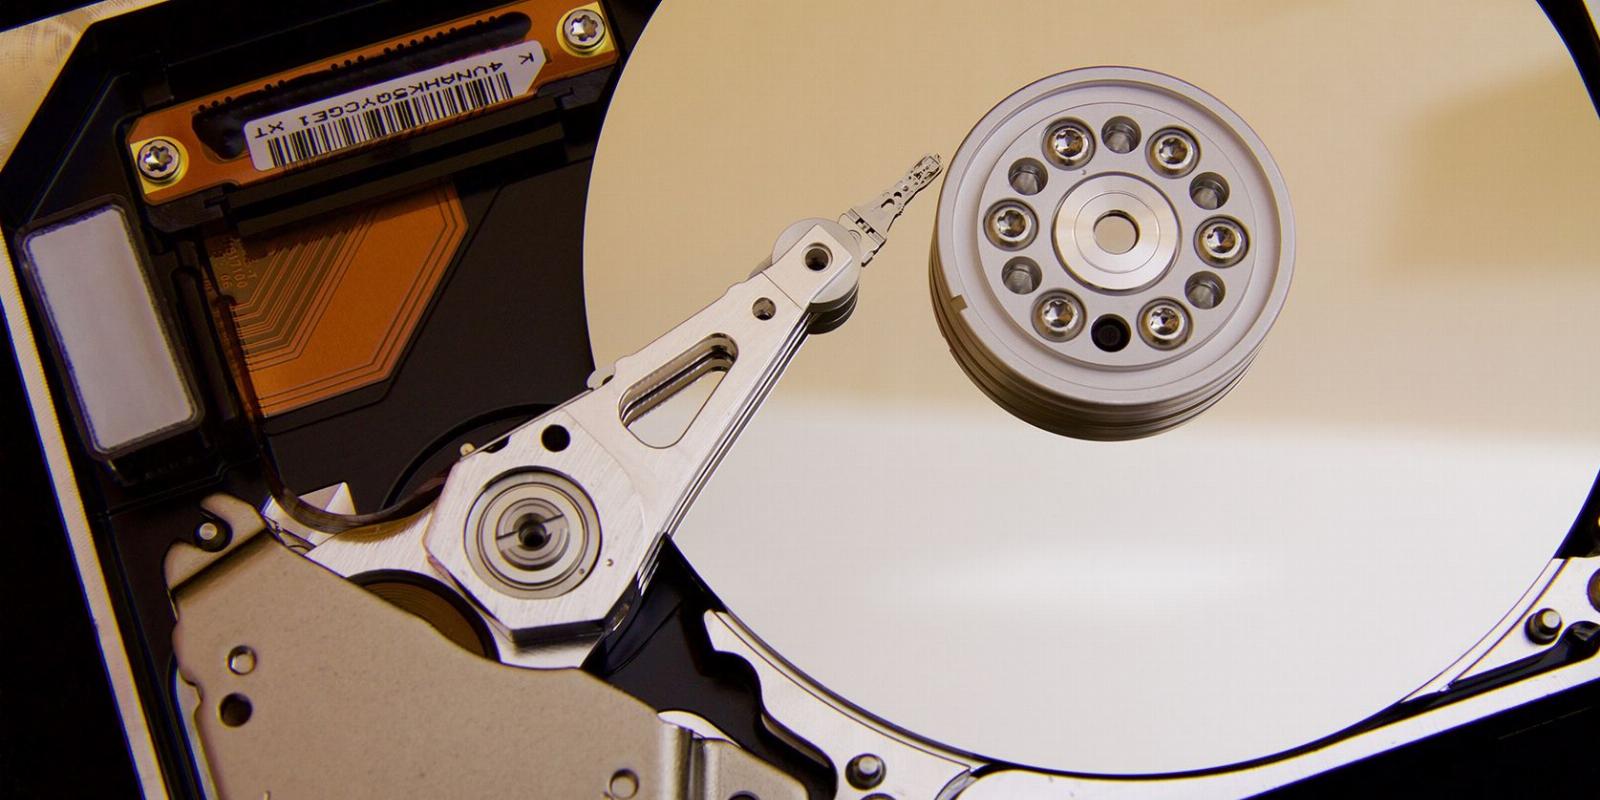 How to Find Your Hard Disk’s Model and Serial Number in Windows 10